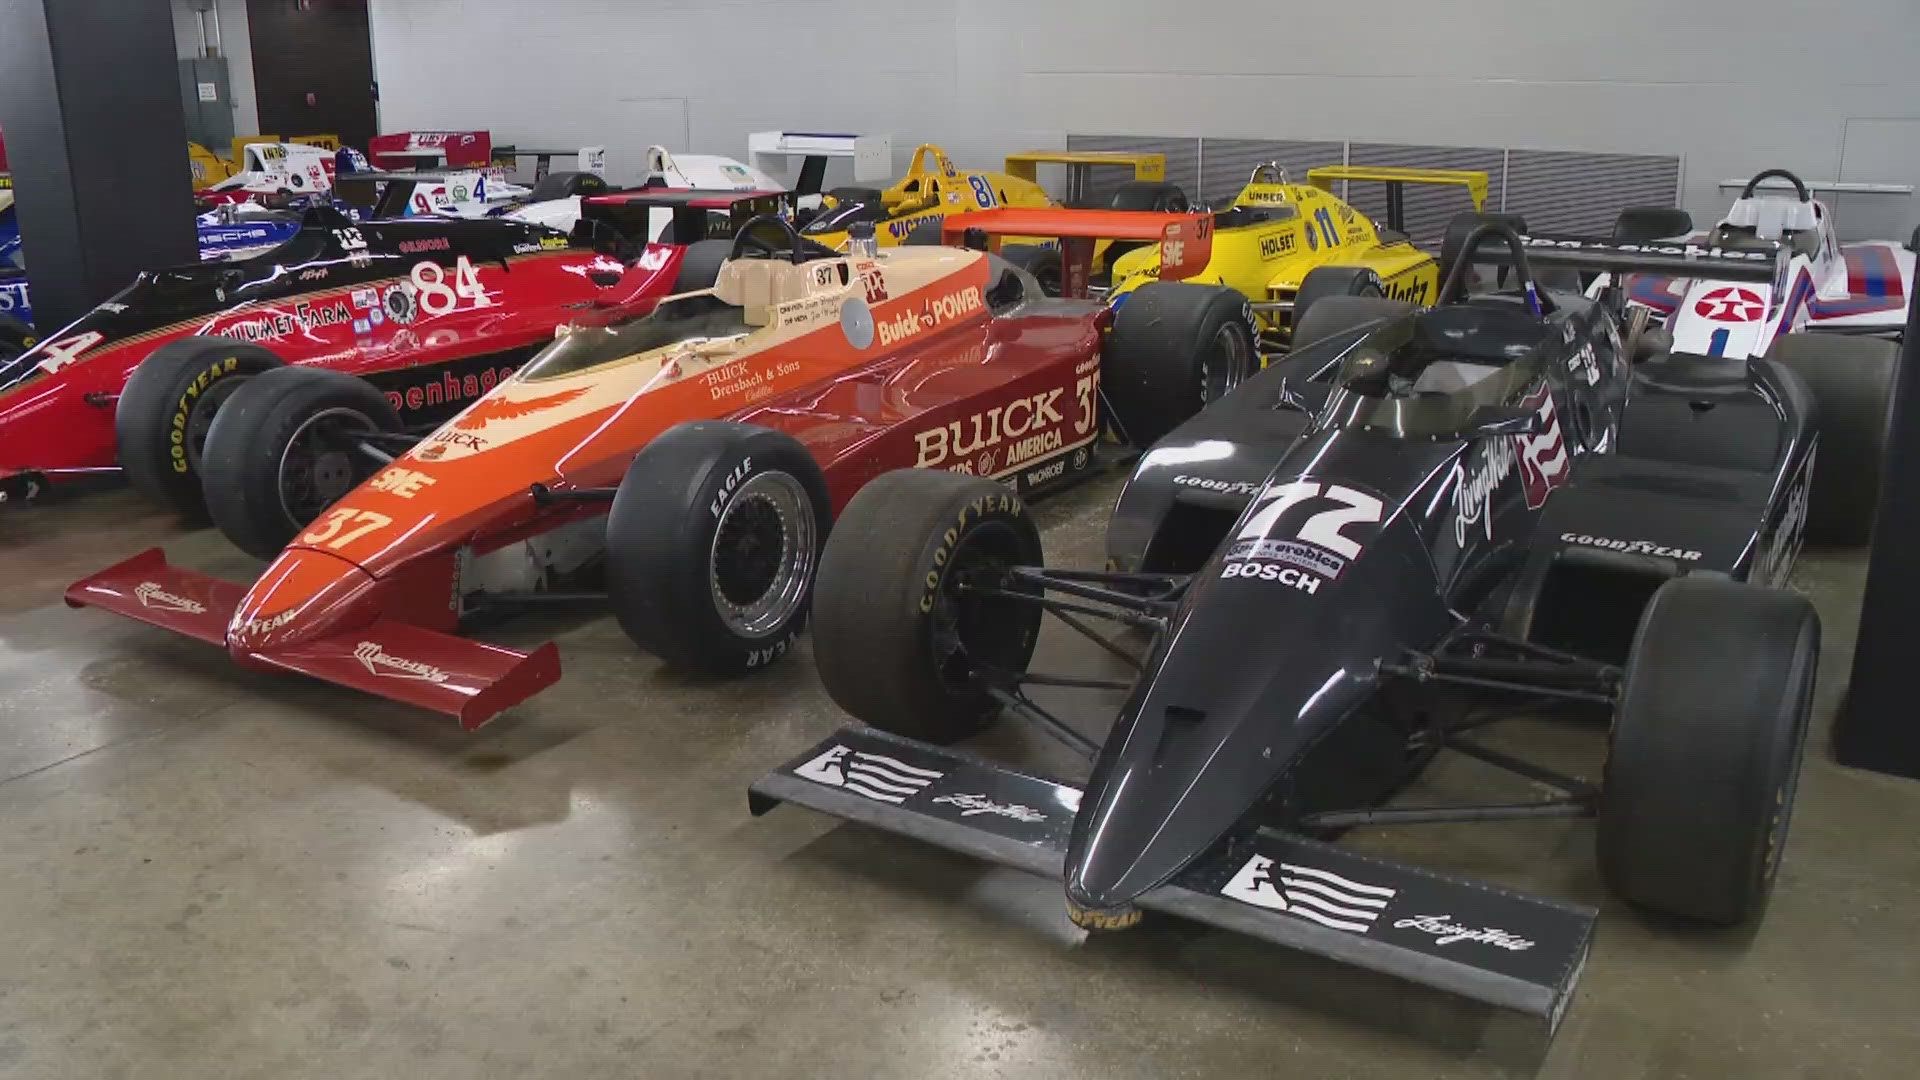 The museum is expected to re-open in time for the 2025 Indianapolis 500.